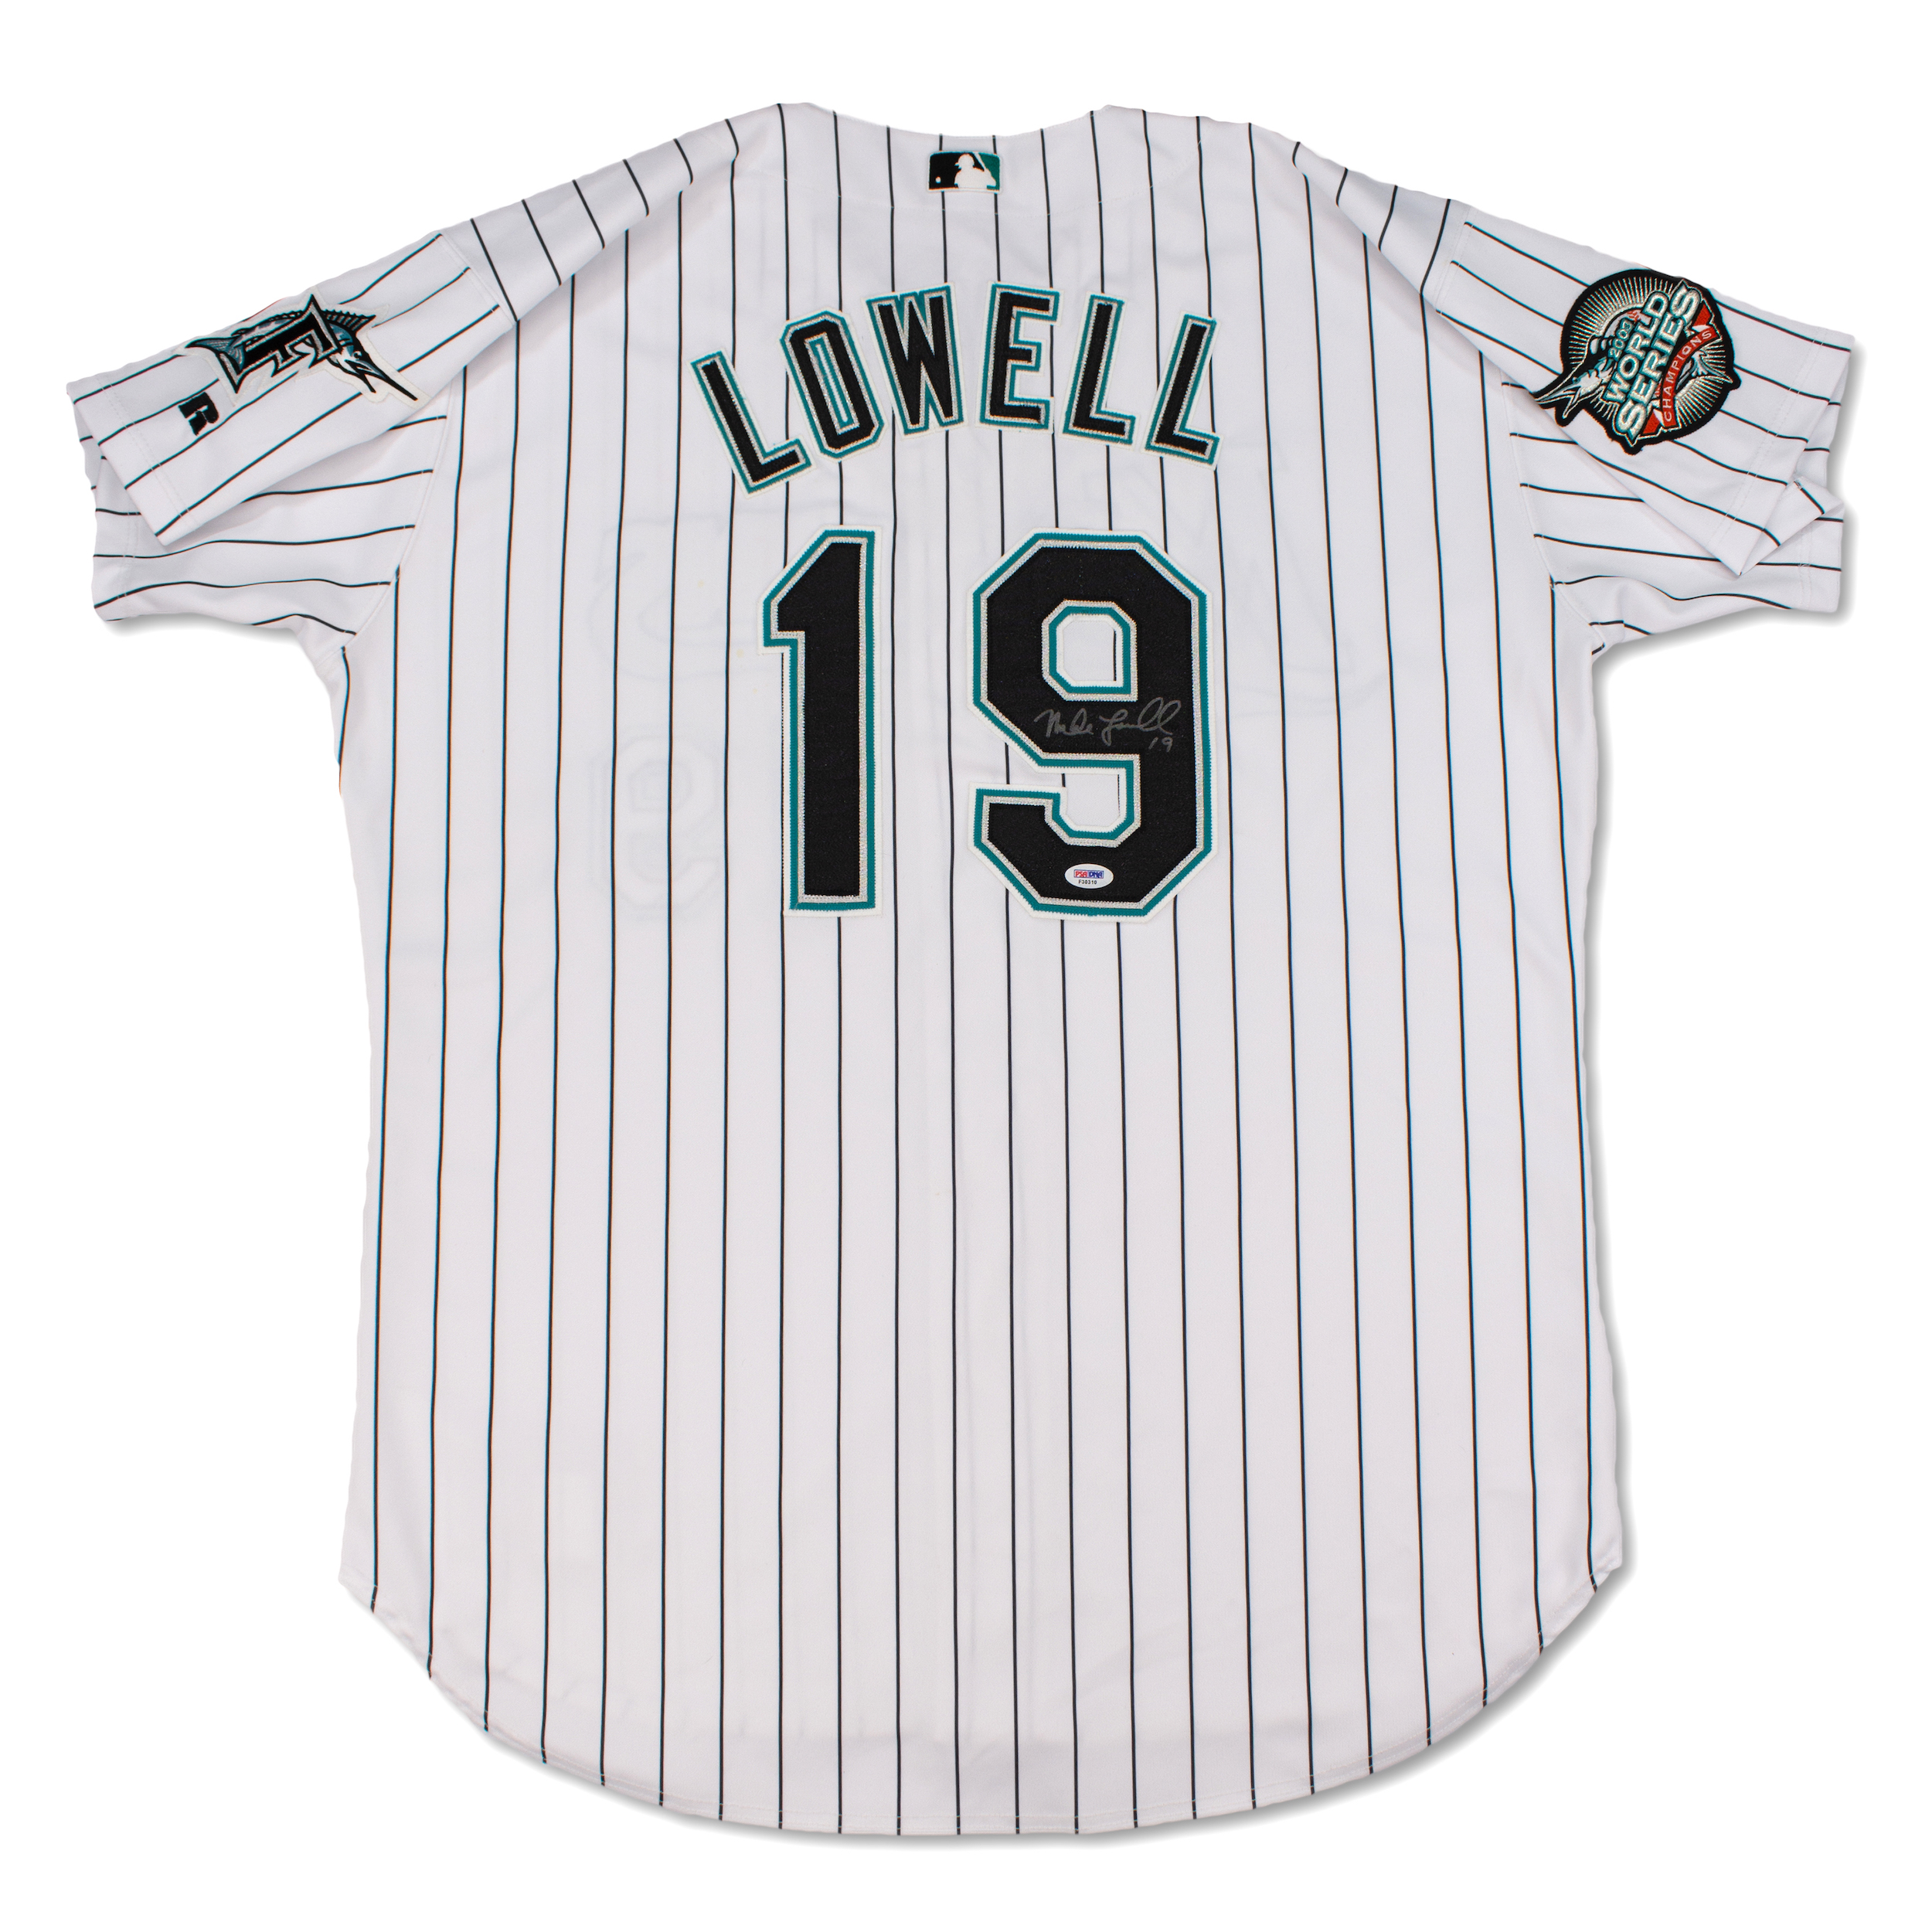 Mike Lowell 2004 Florida Marlins Game 